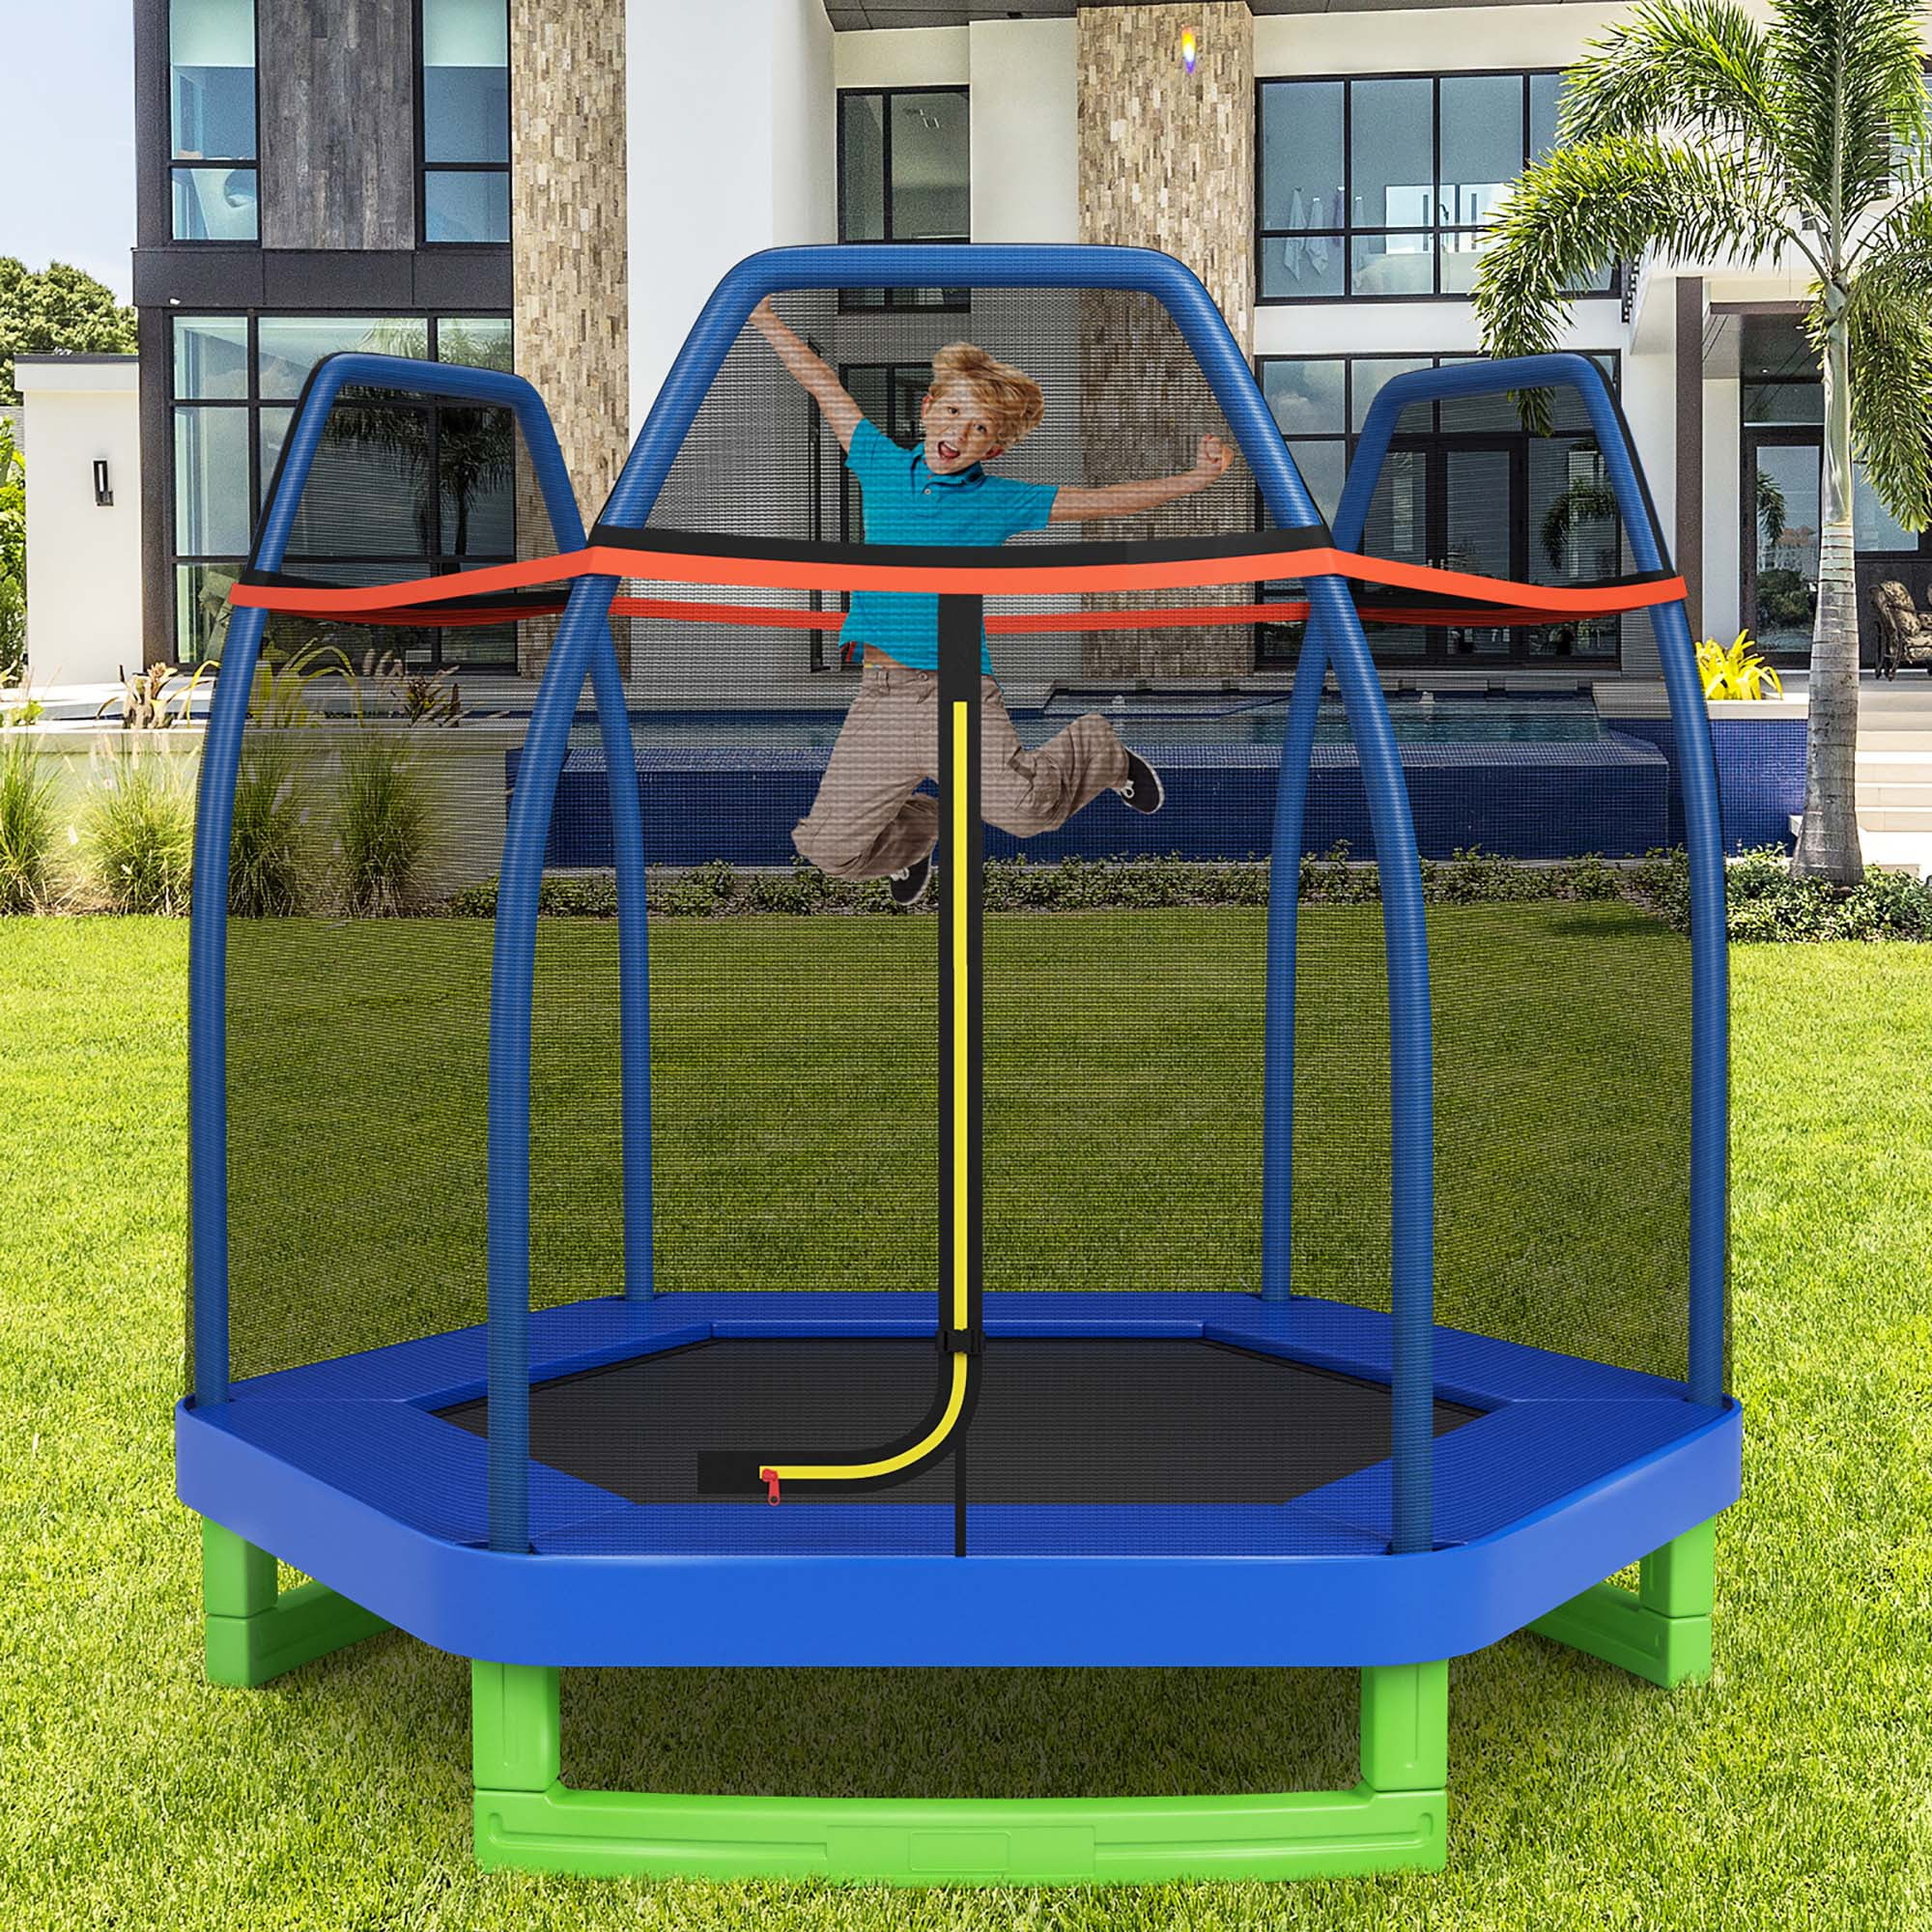 Costway 7 FT Kids Trampoline with Safety Enclosure Net Spring Pad